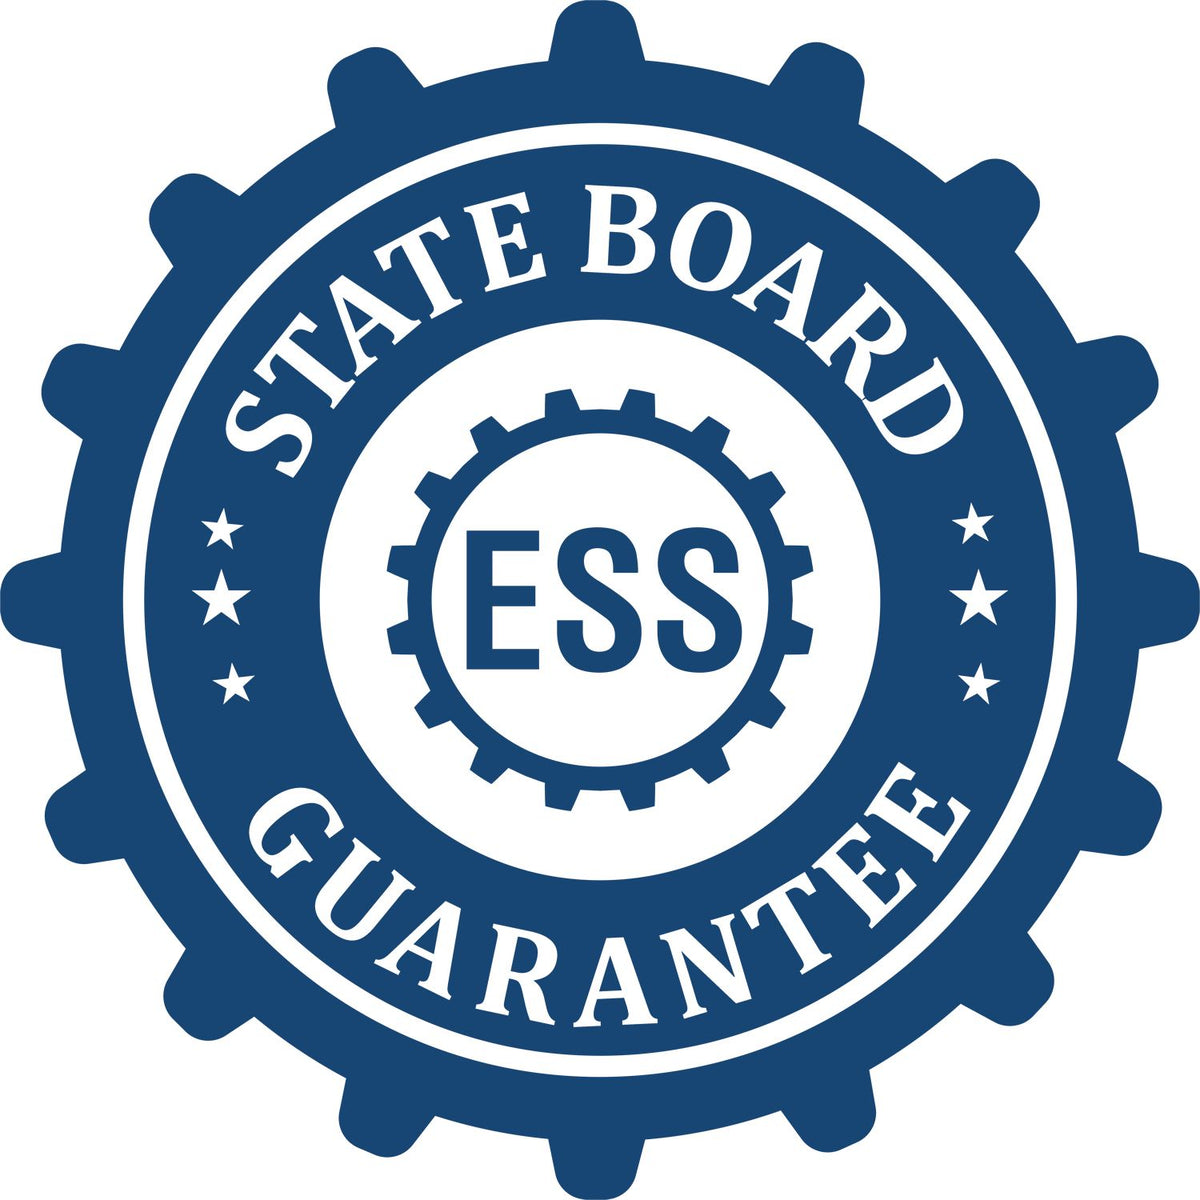 An emblem in a gear shape illustrating a state board guarantee for the Wooden Handle North Carolina State Seal Notary Public Stamp product.